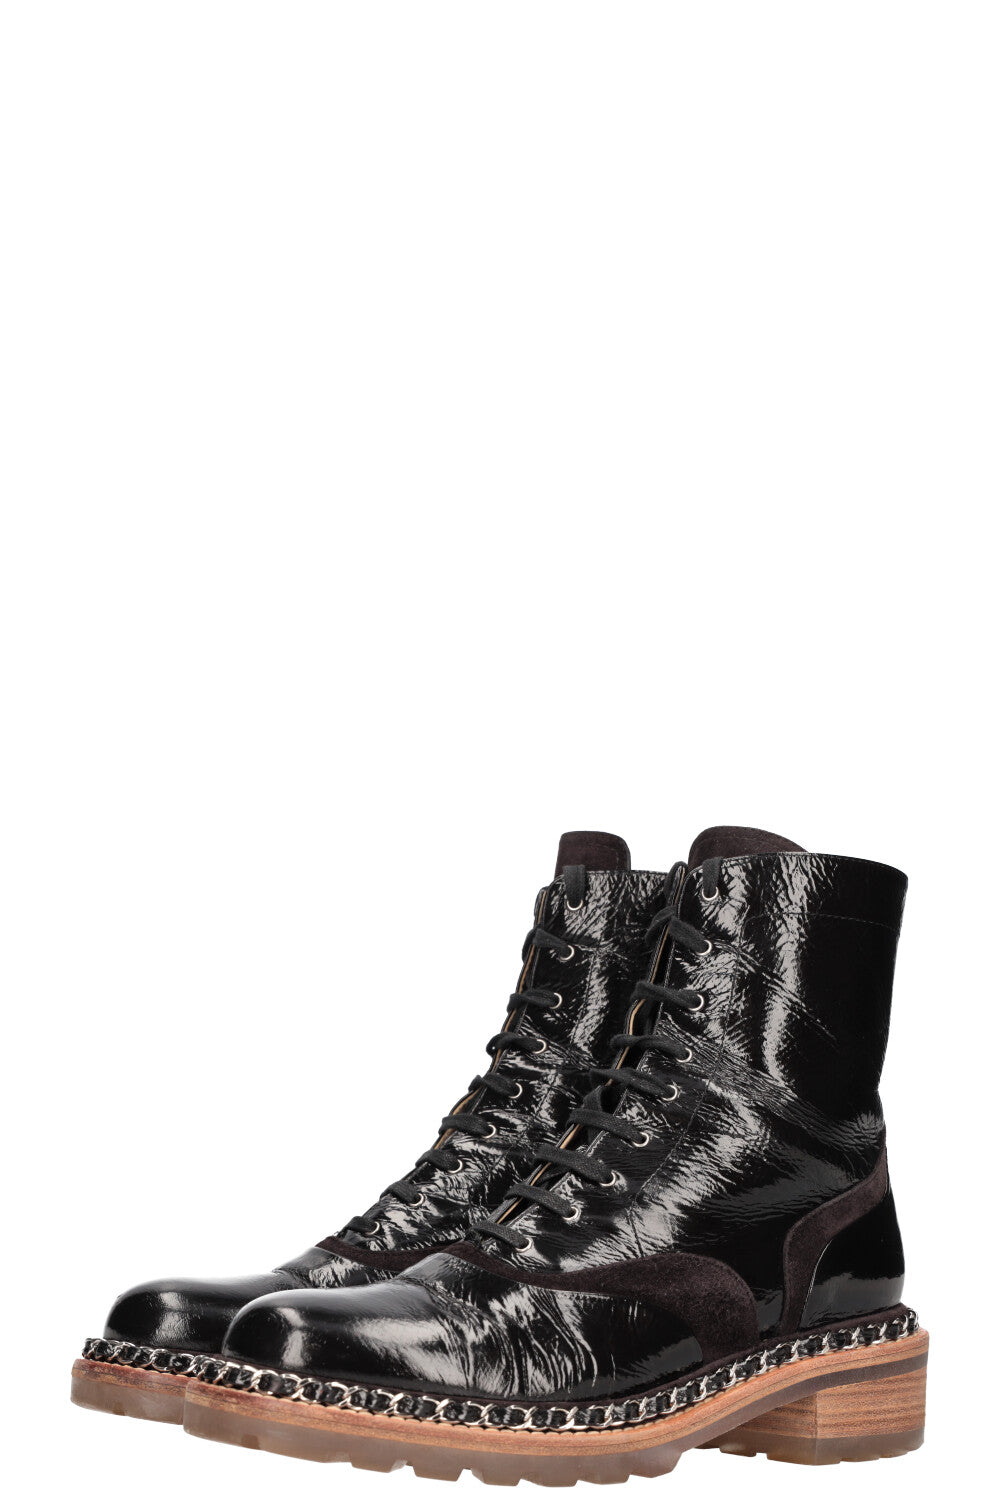 CHANEL Boots Chain Patent Leather Black